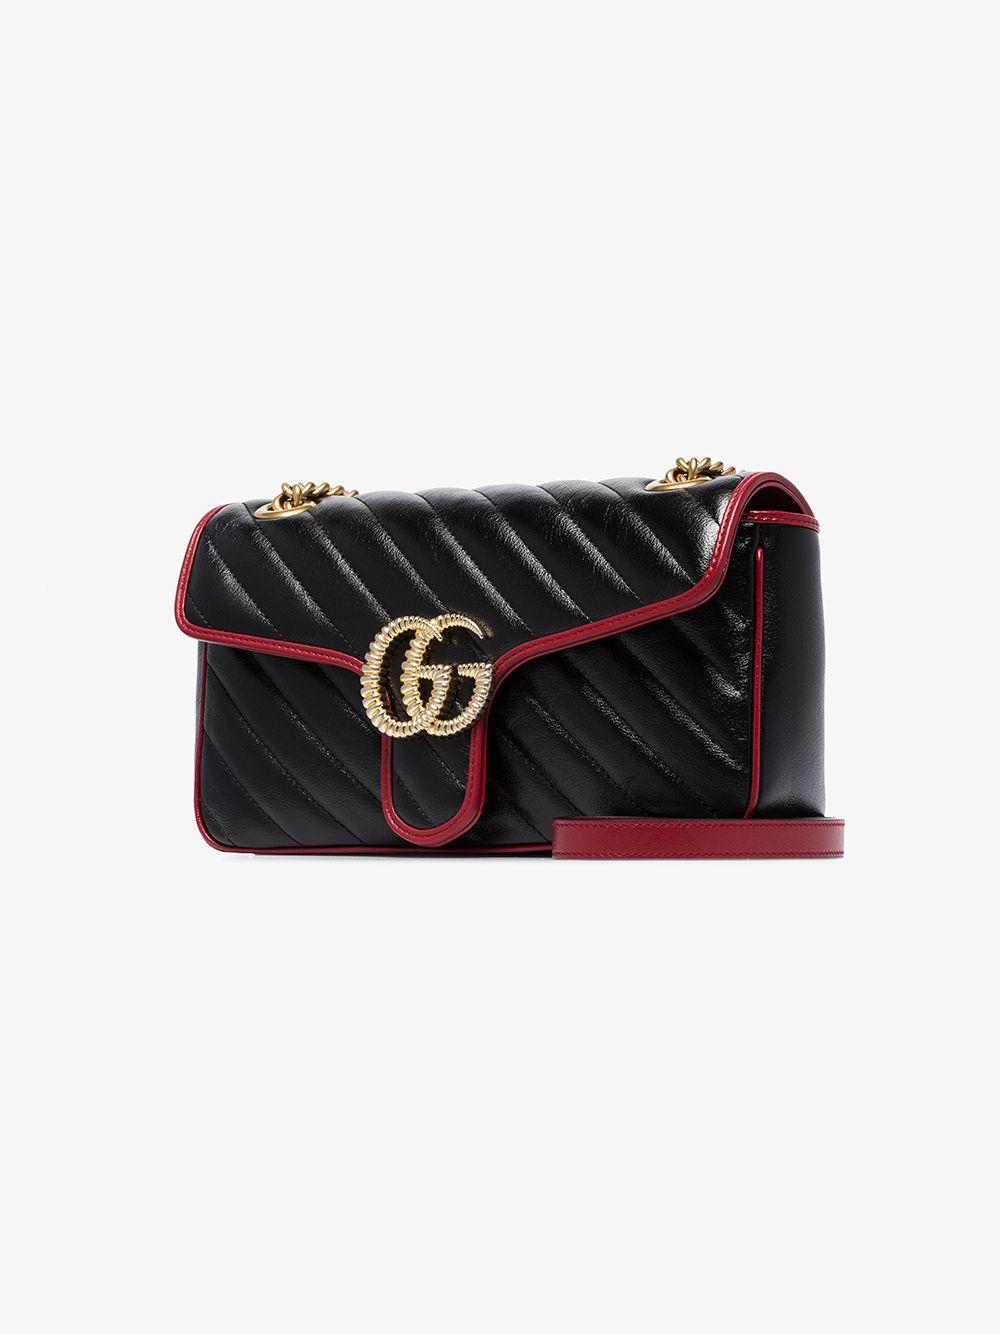 GUCCI Calfskin Matelasse GG Marmont Flap Backpack Hibiscus Red 1132980